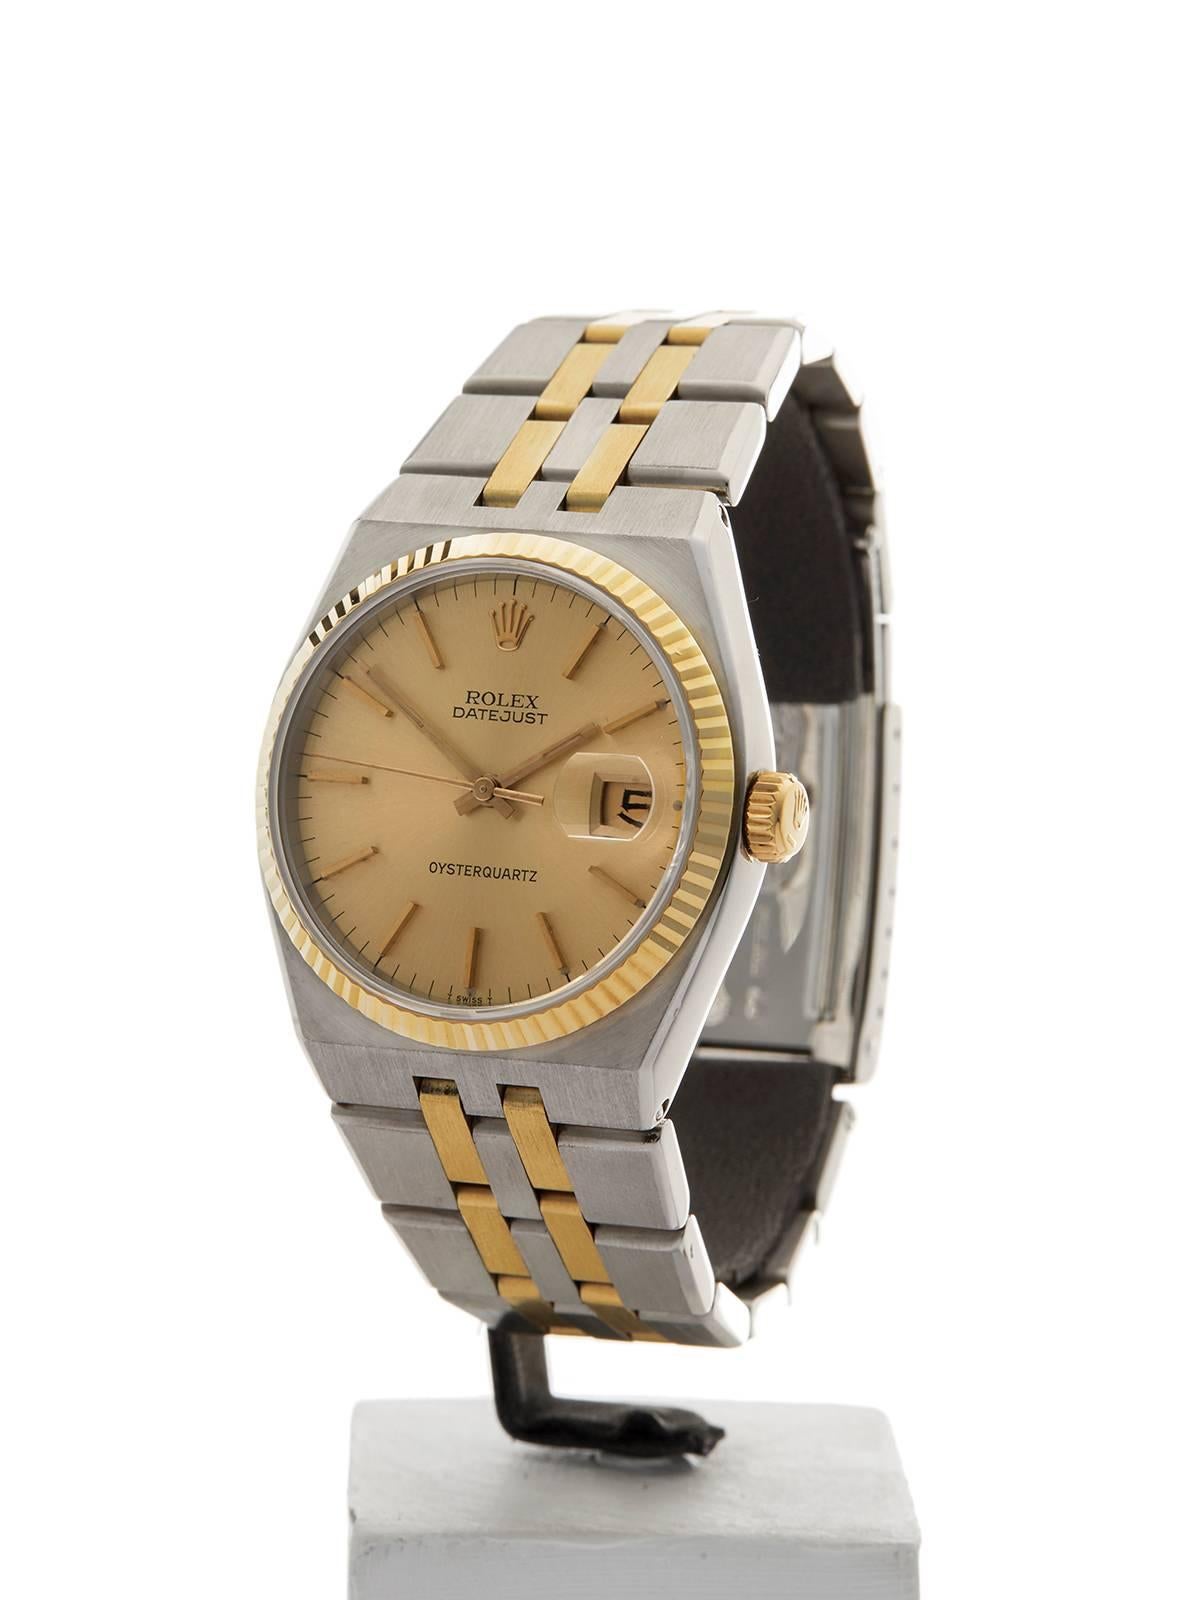 Ref: W3690
Model: 17013
Serial: 544****
Condition: 9 - Excellent condition
Age: 10th September 1969
Case Diameter: 36 mm
Case Size: 36mm
Box and Papers: Box Only
Movement: Quartz
Case: Stainless Steel/18k Yellow Gold
Dial: Champagne Baton
Bracelet: